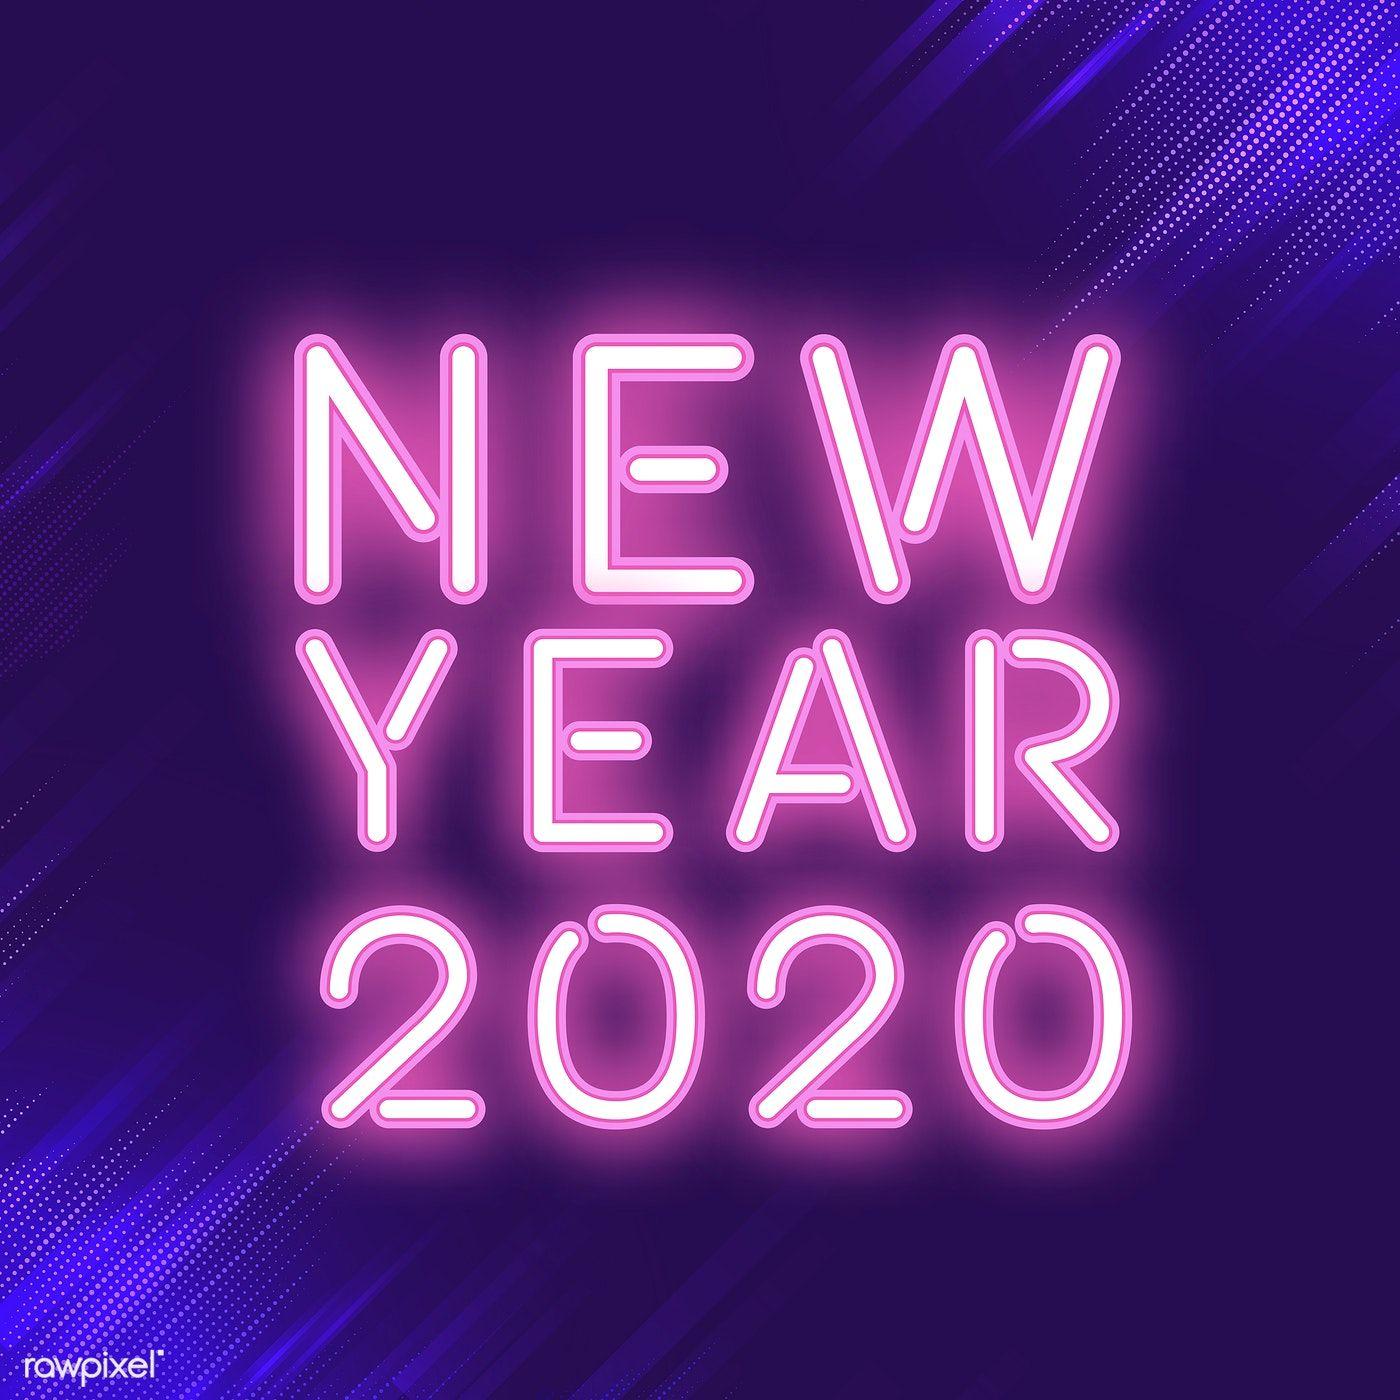 Pink new year 2020 neon sign vector. free image